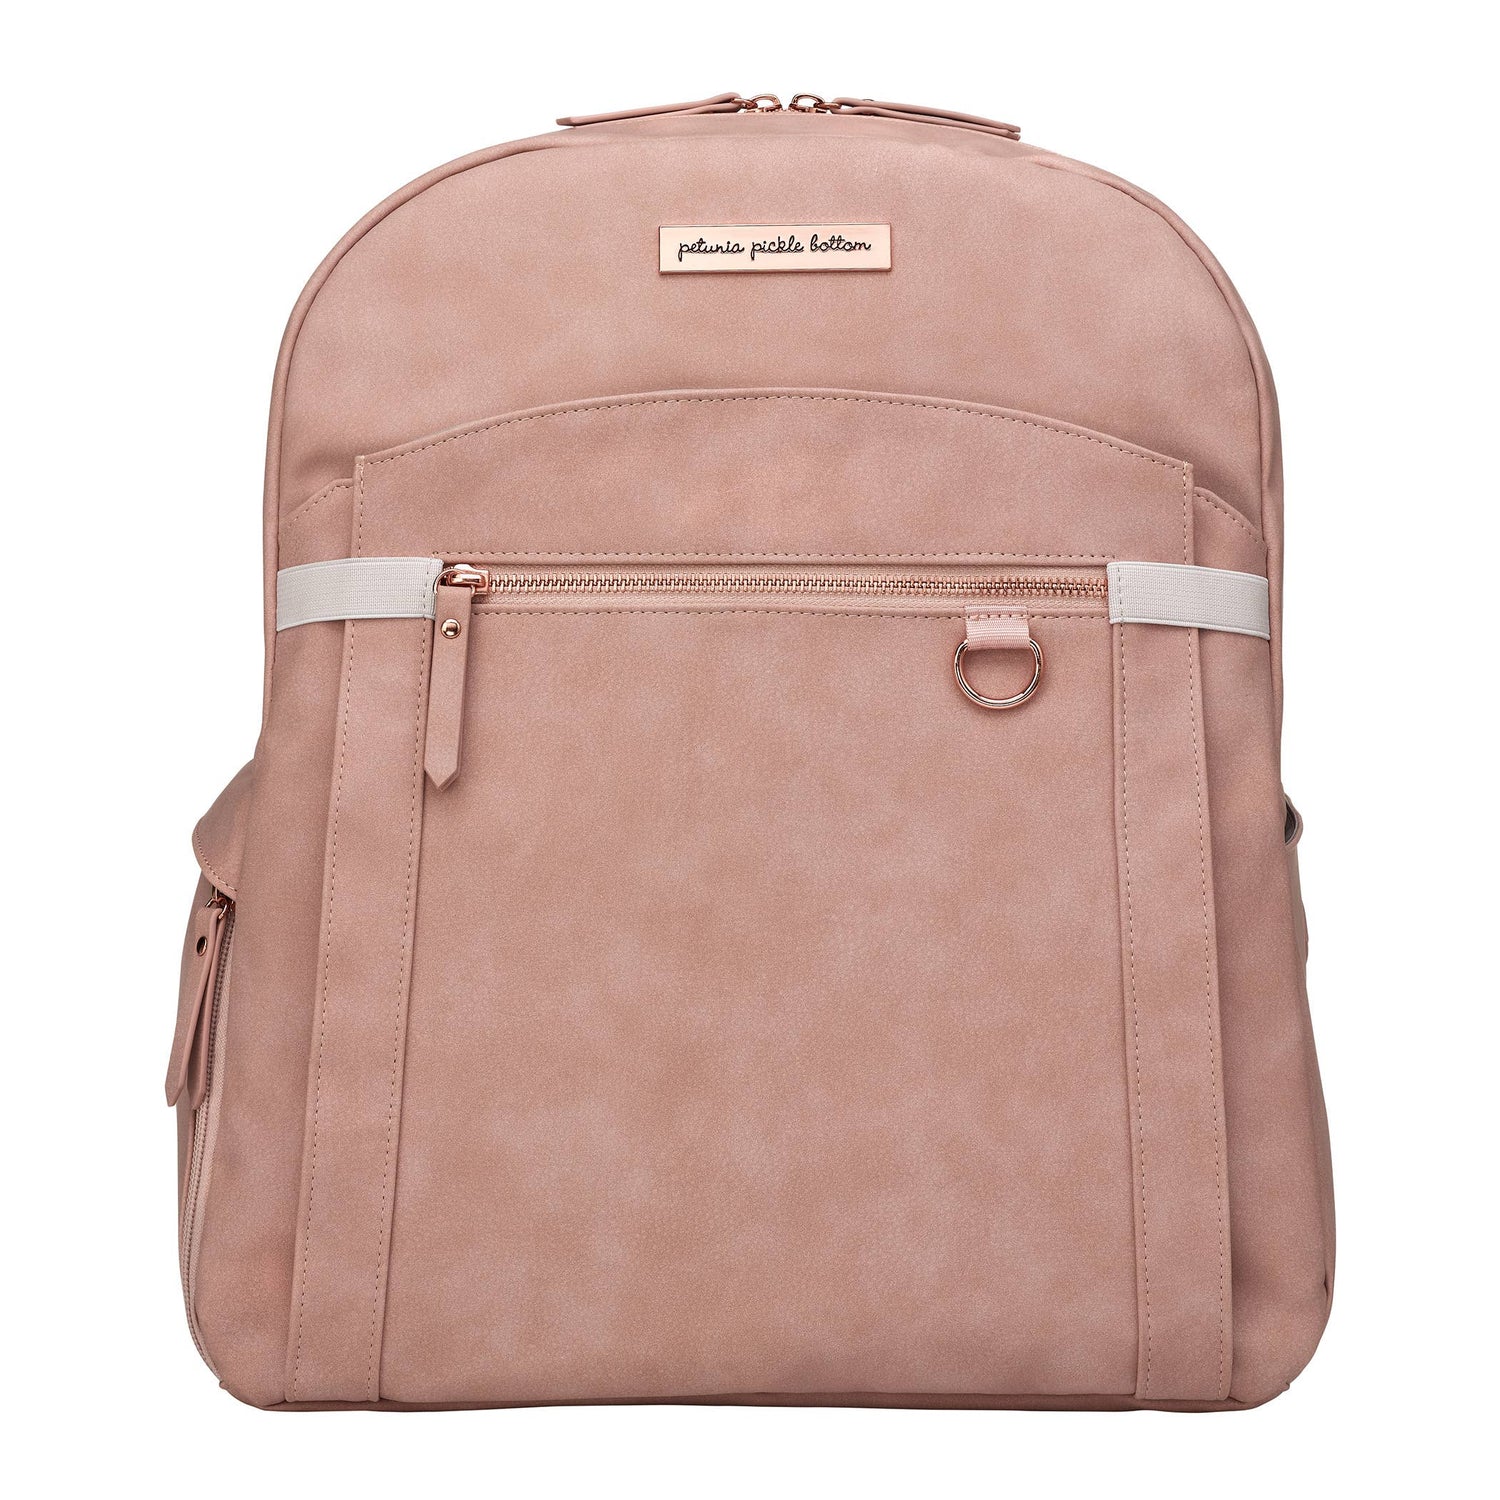 2-in-1 Provisions Backpack - Toffee Rose